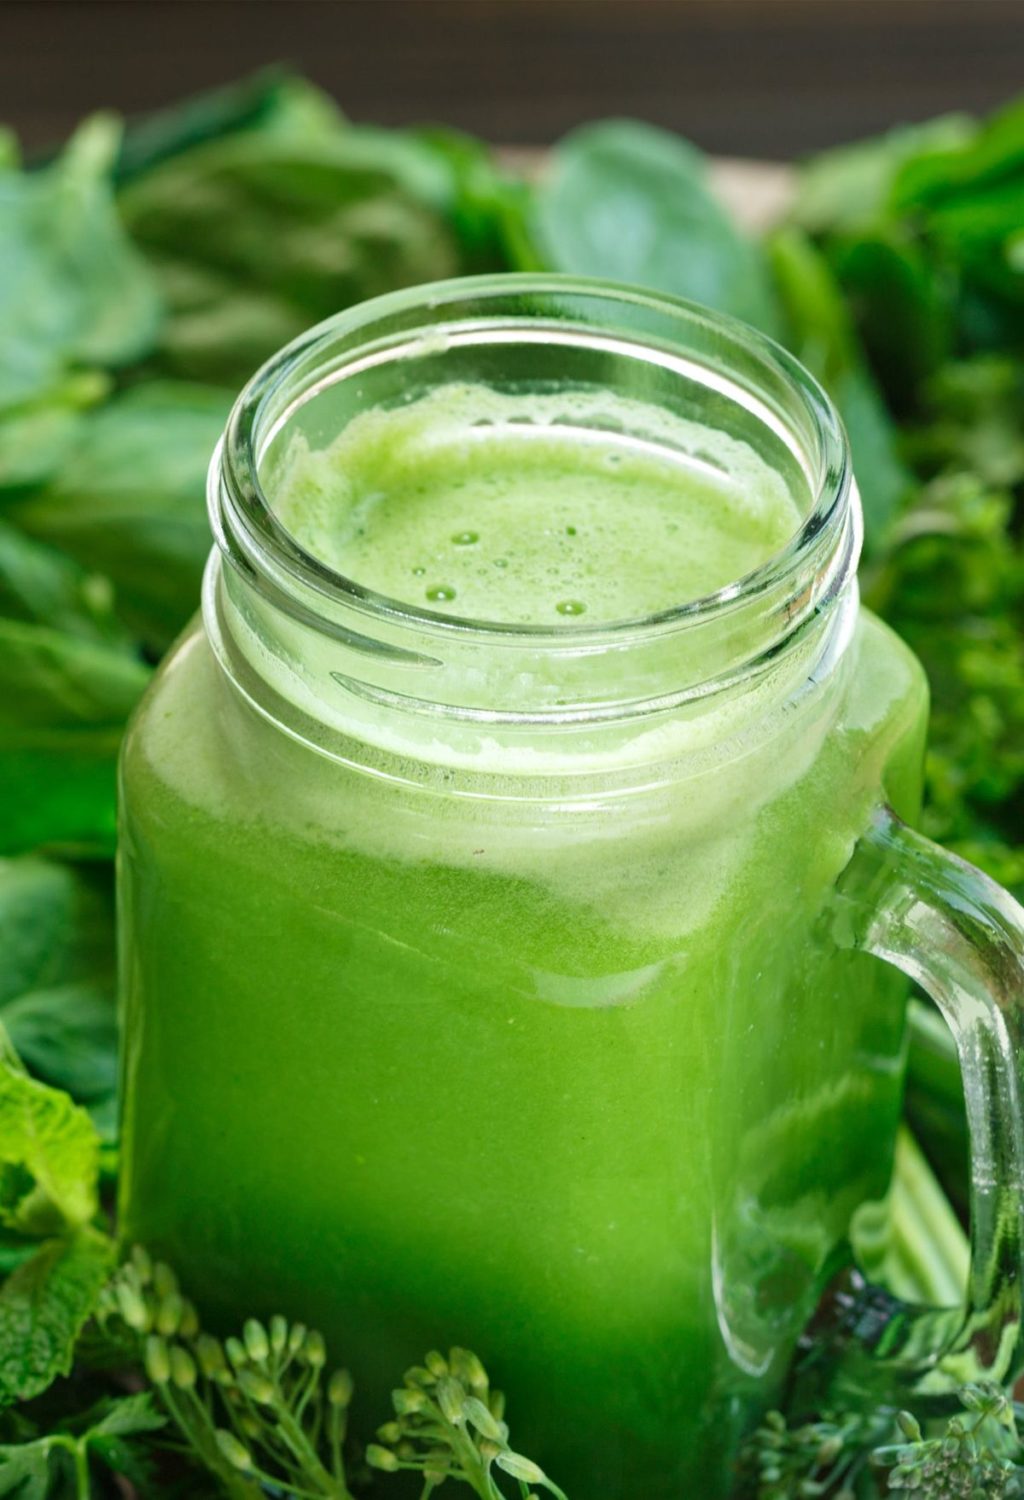 A jar of green juice surrounded by green leaves.